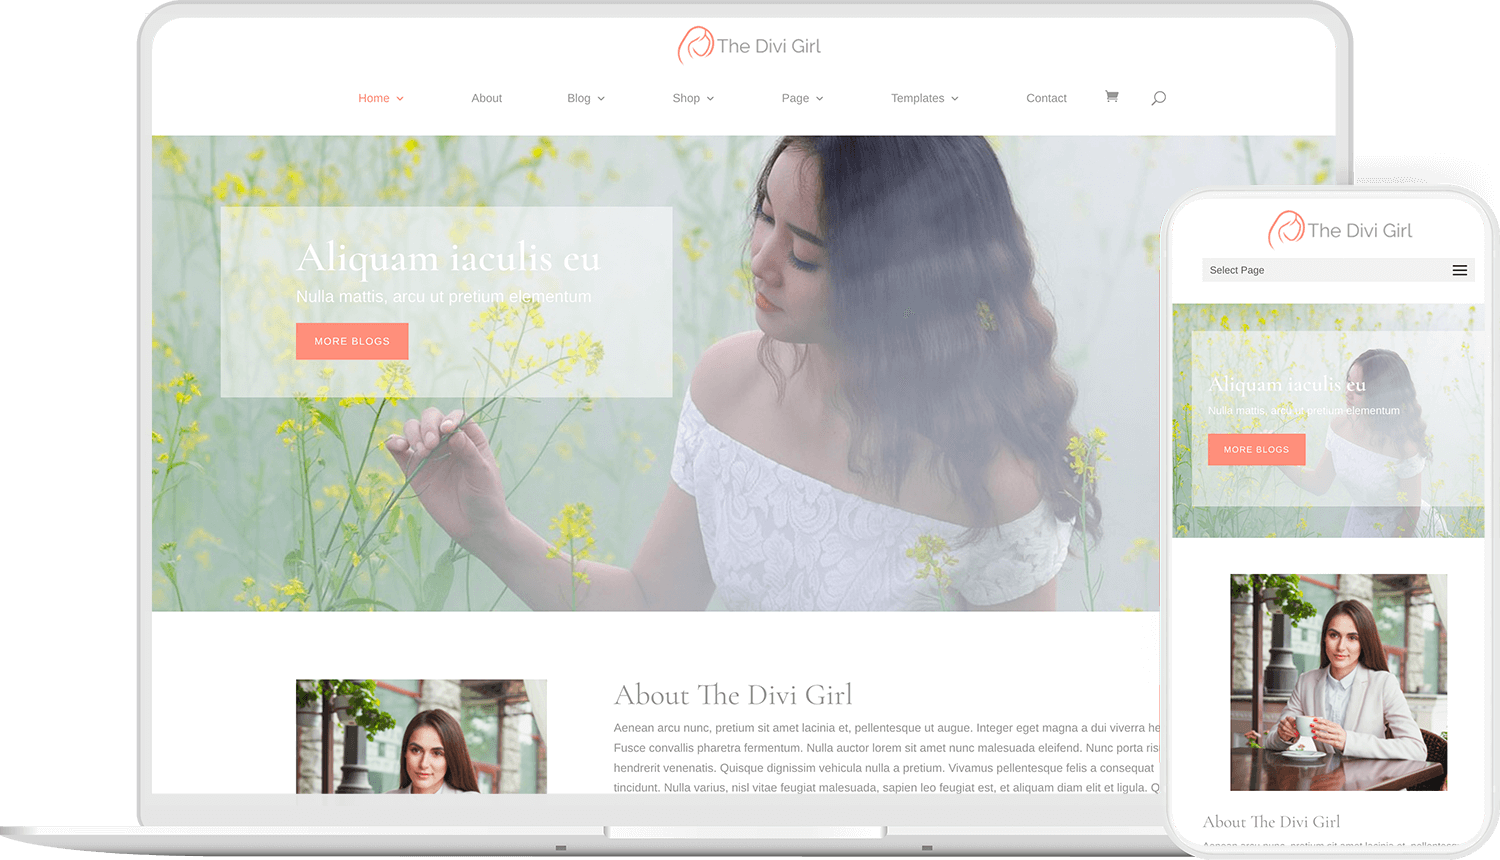 Divi Girl child theme provides you with layouts and options to create website for female professionals in Divi